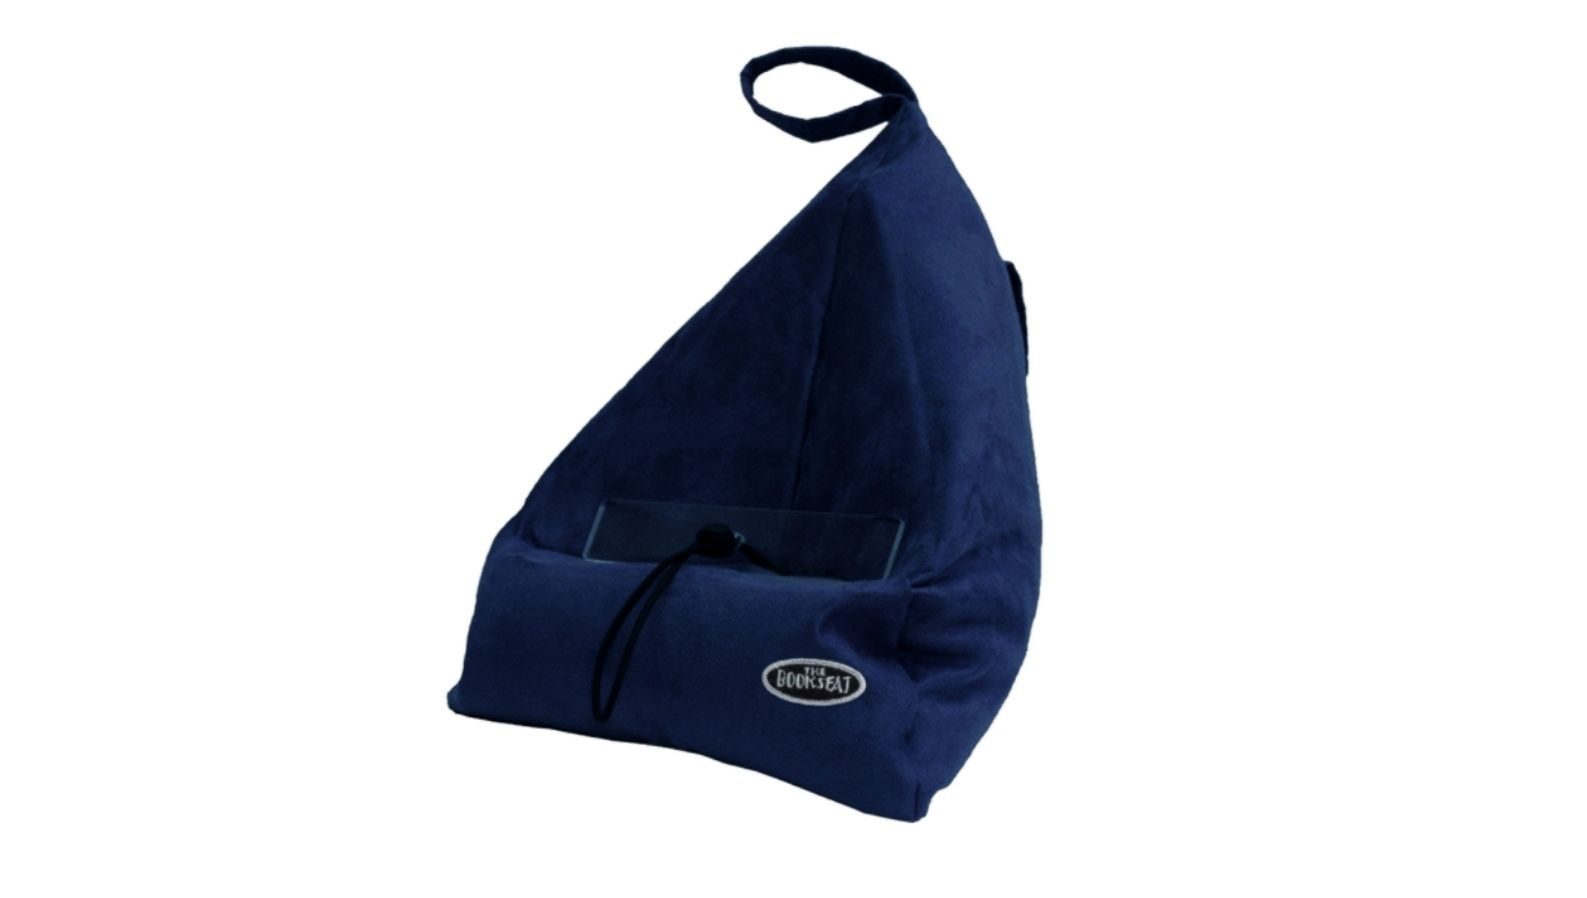 A navy blue bookseat is a great gift for a book lover